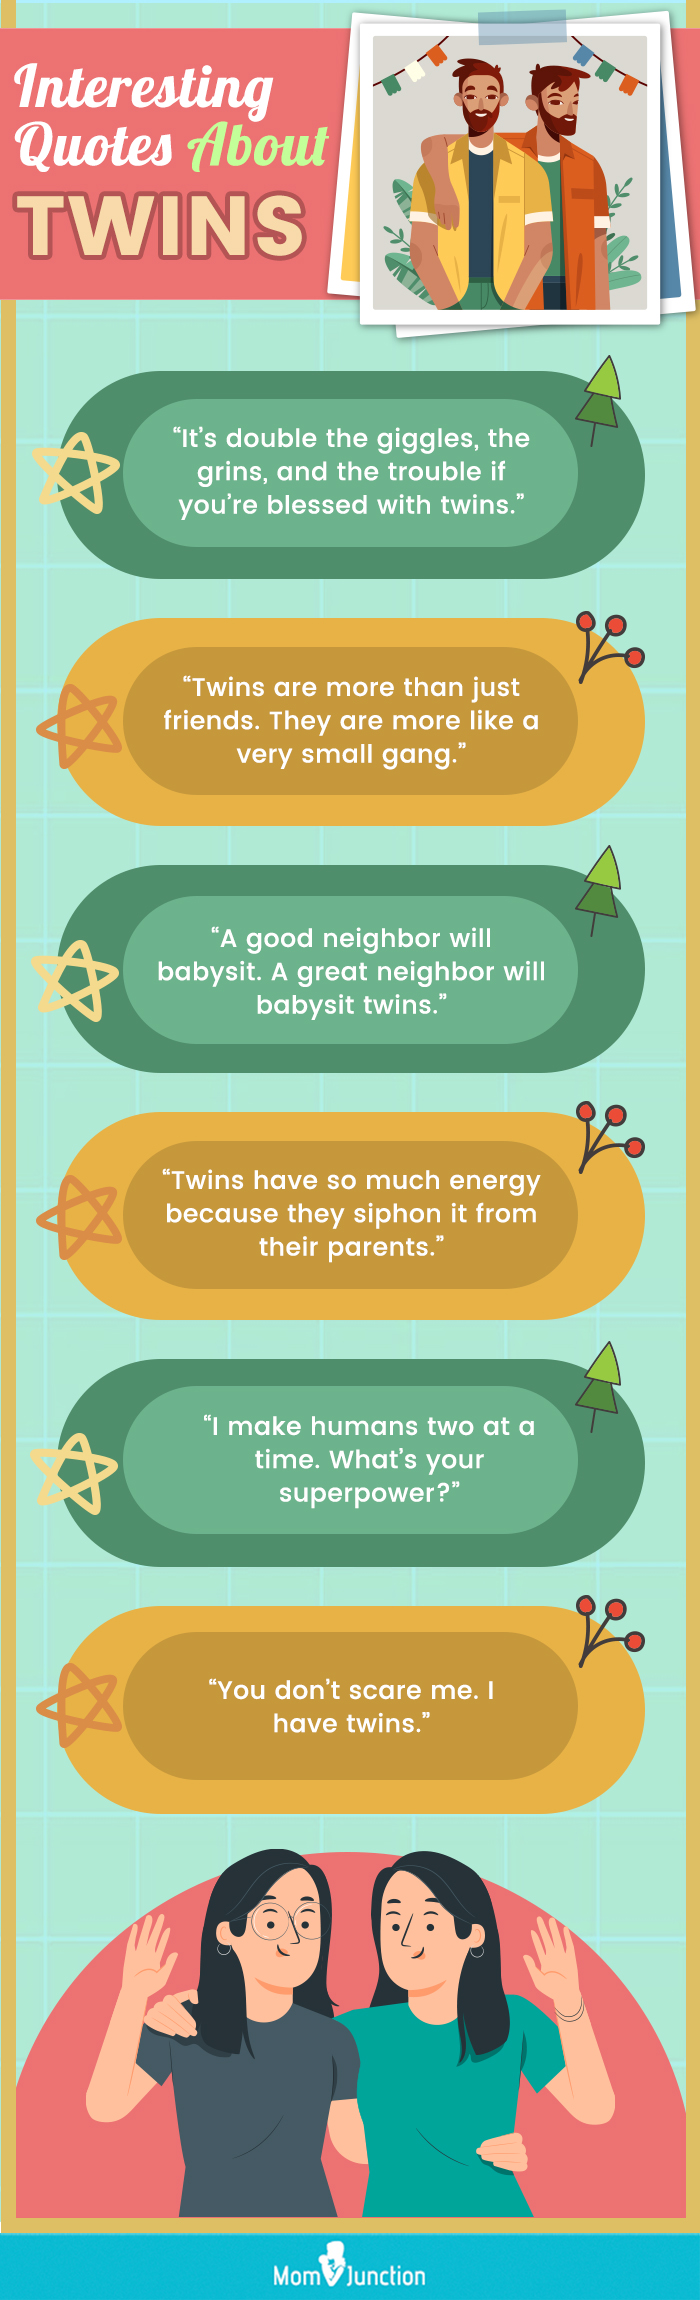 interesting quotes about twins (infographic)